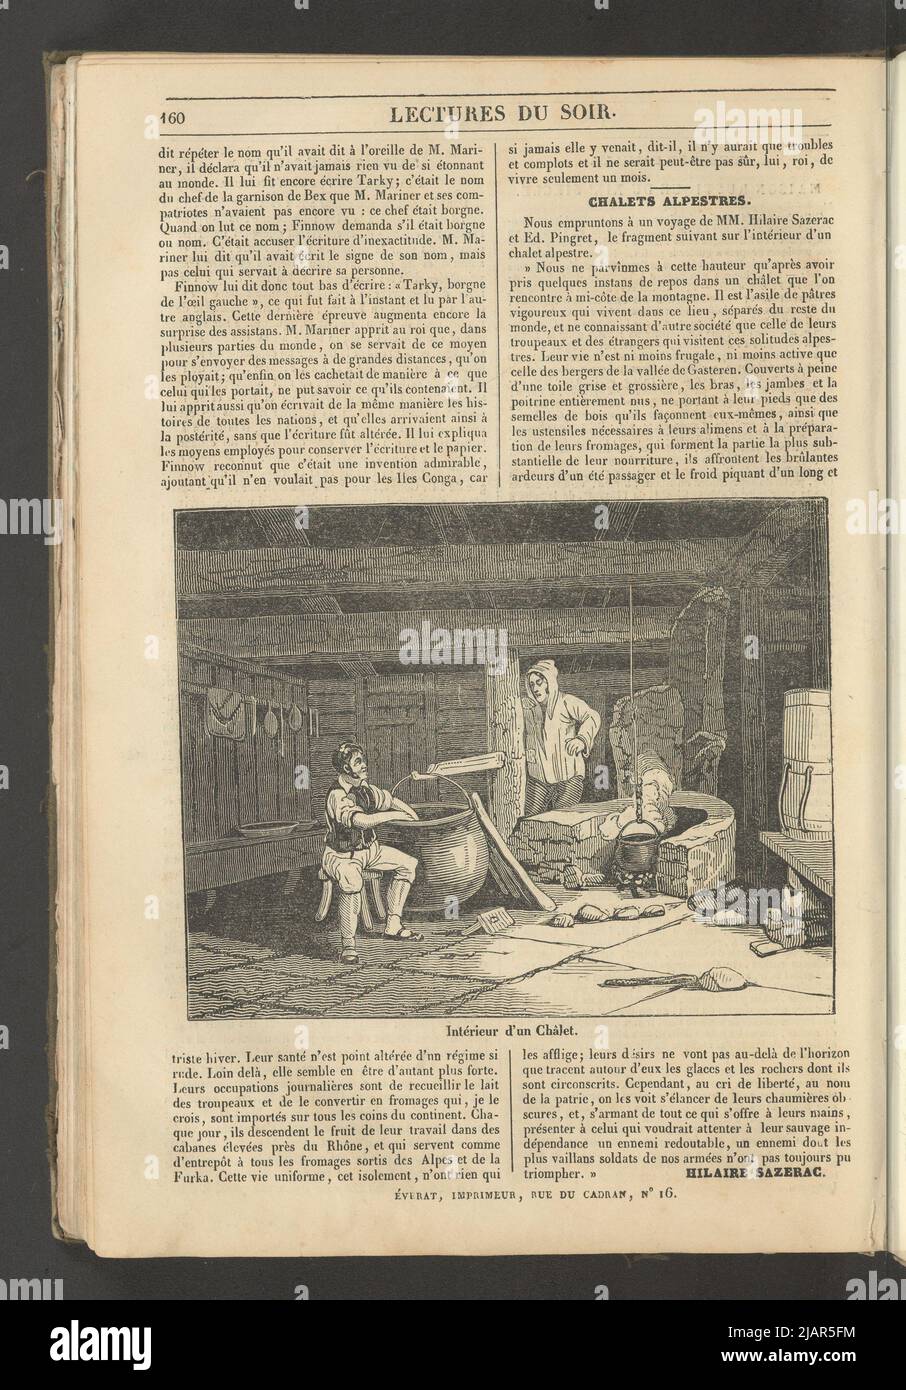 Yearbook 2, notebook 19, May 1834 The interior of a wooden hut, illustration for the article Chalans Alpestres in: Musee des Familles, Lecture du Soir. T. 1. (year 1 and 2) Paris, [1833 1834]. unknown Stock Photo